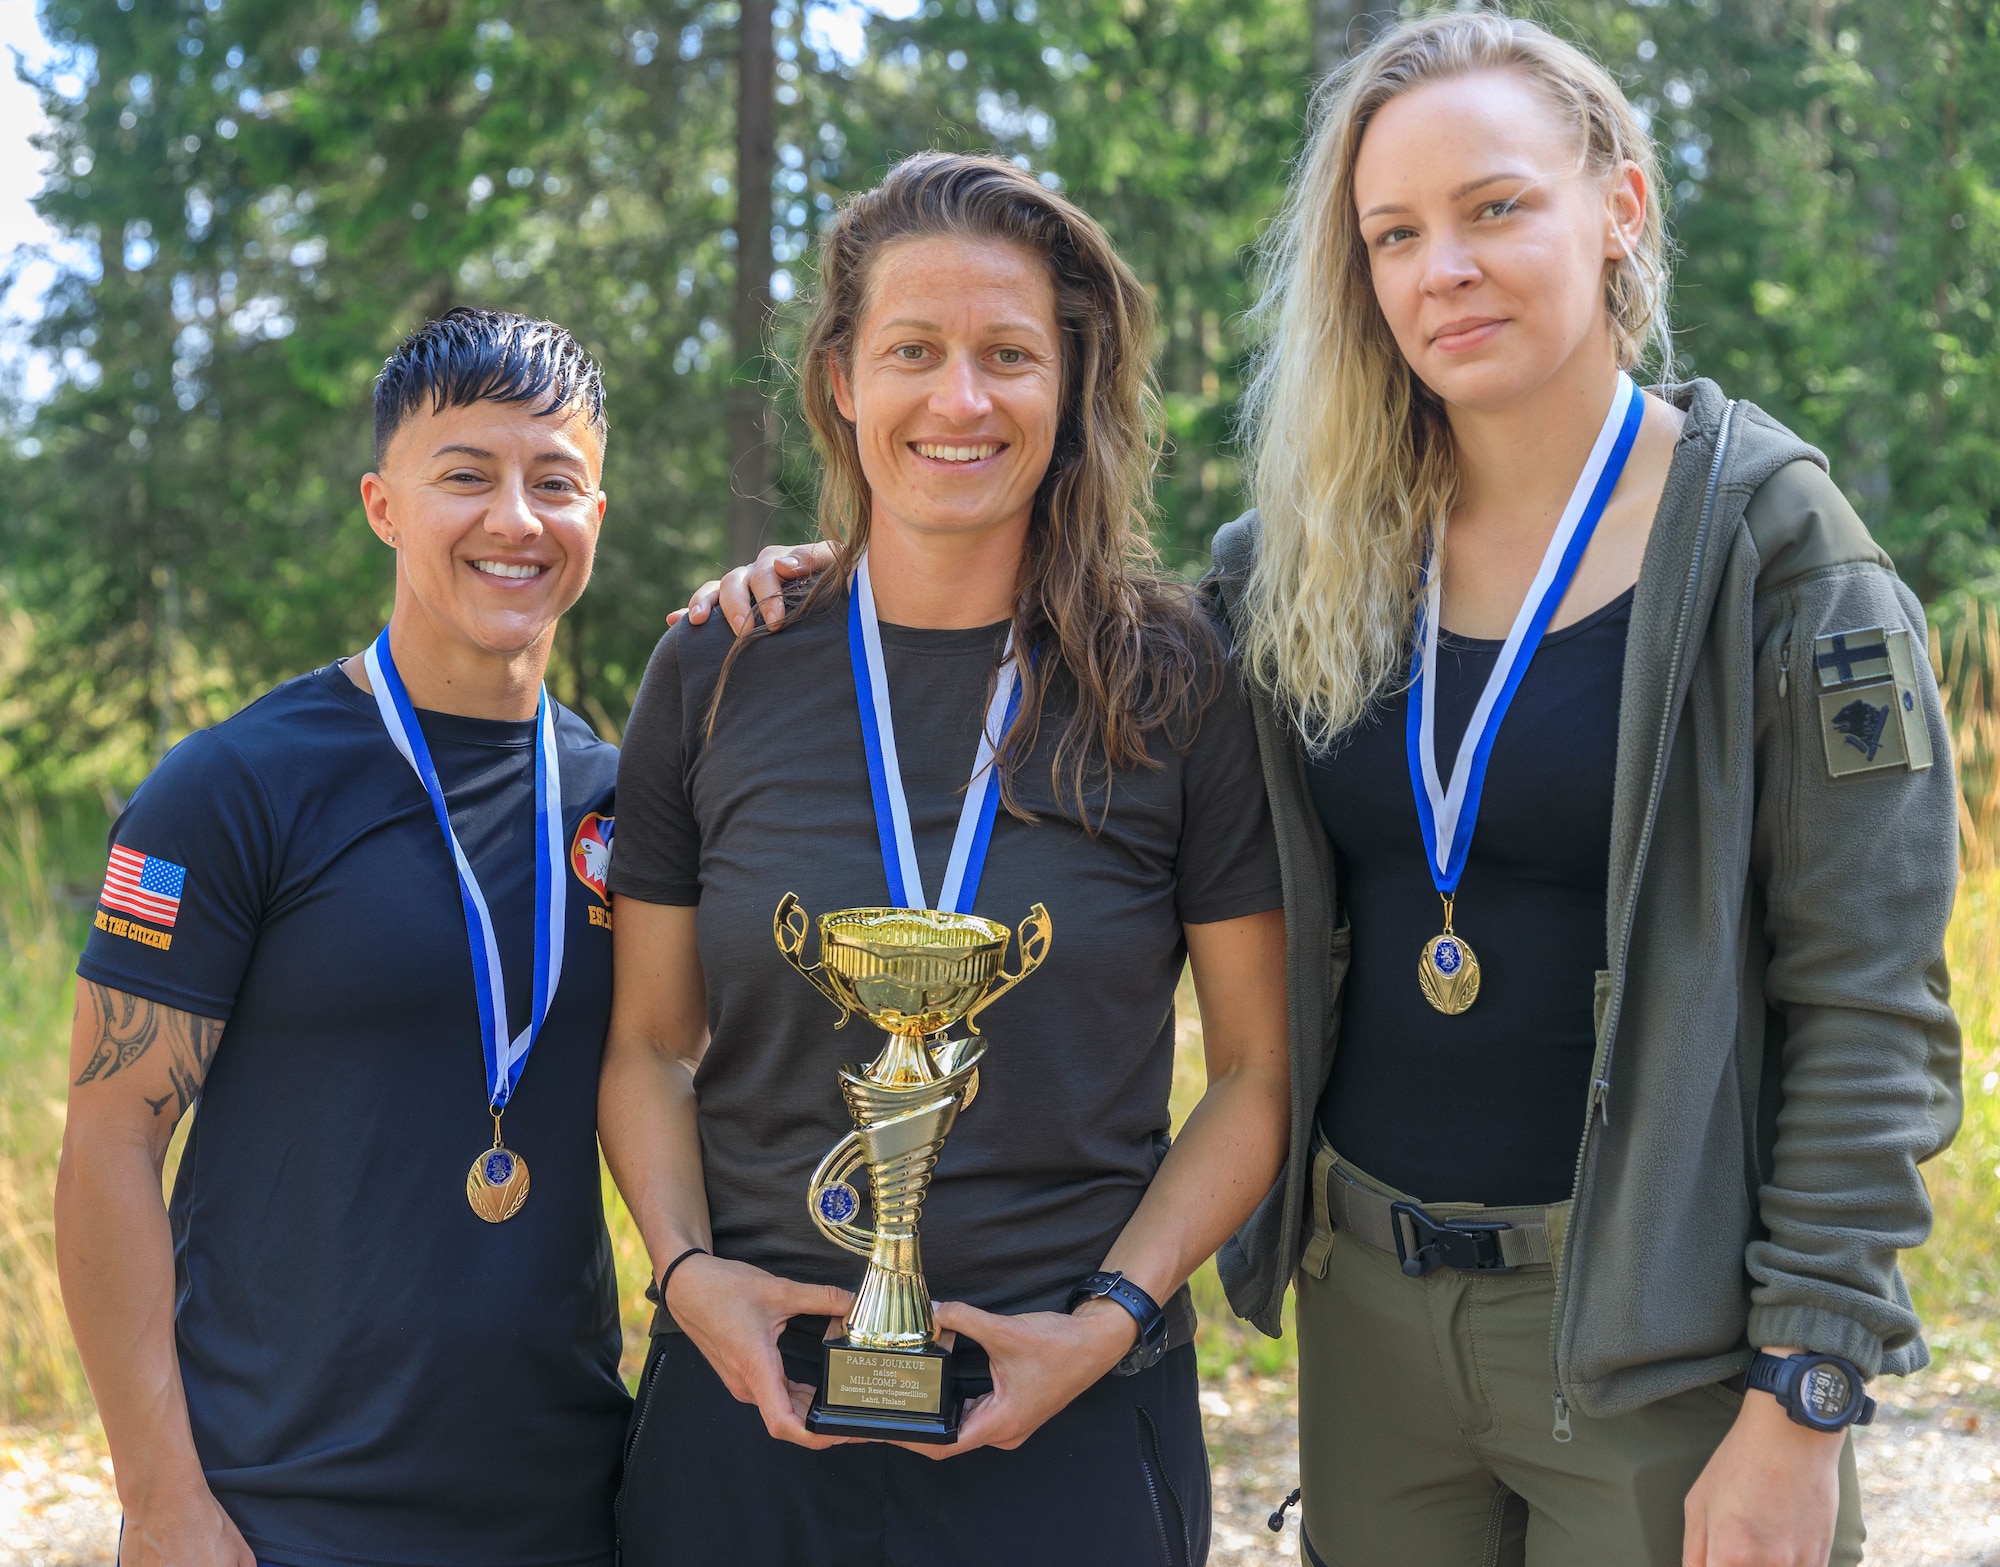 The top female team at the 2021 Interallied Confederation of Reserve Officers military competition pose for a picture after the closing ceremony in Lahti, Finland on August 1st. This team was composed of reserve service members from three nations, Finland, Denmark and the United States of America. The CIOR MILCOMP is an annual competition among NATO and Partnership for Peace nations. This competition test reserve service members from allied nations on several core disciplines in teams of three.